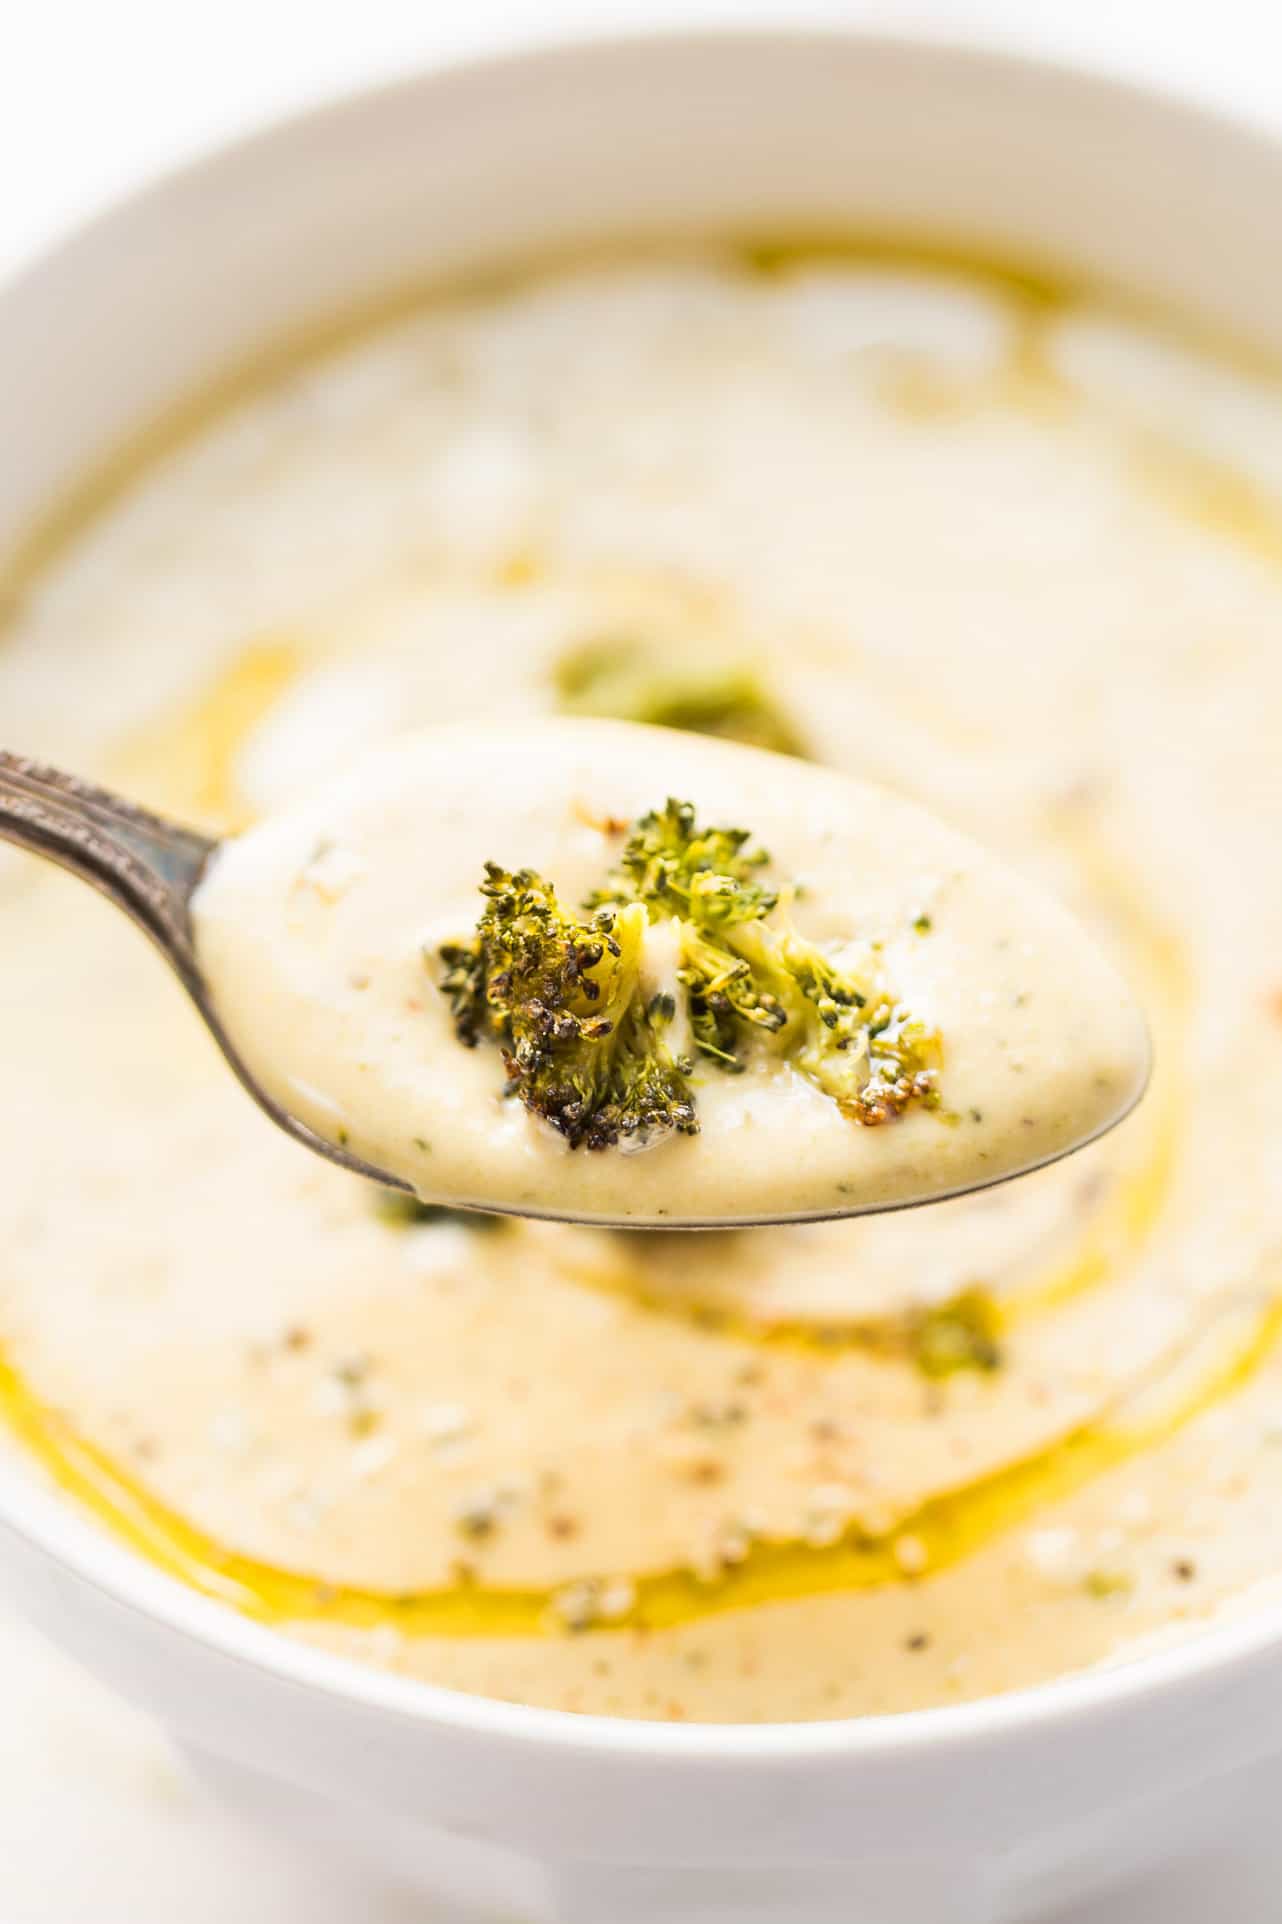 This is the BEST DAMN broccoli chowder on the planet! Packed with flavor, super thick and creamy and made WITHOUT any dairy!